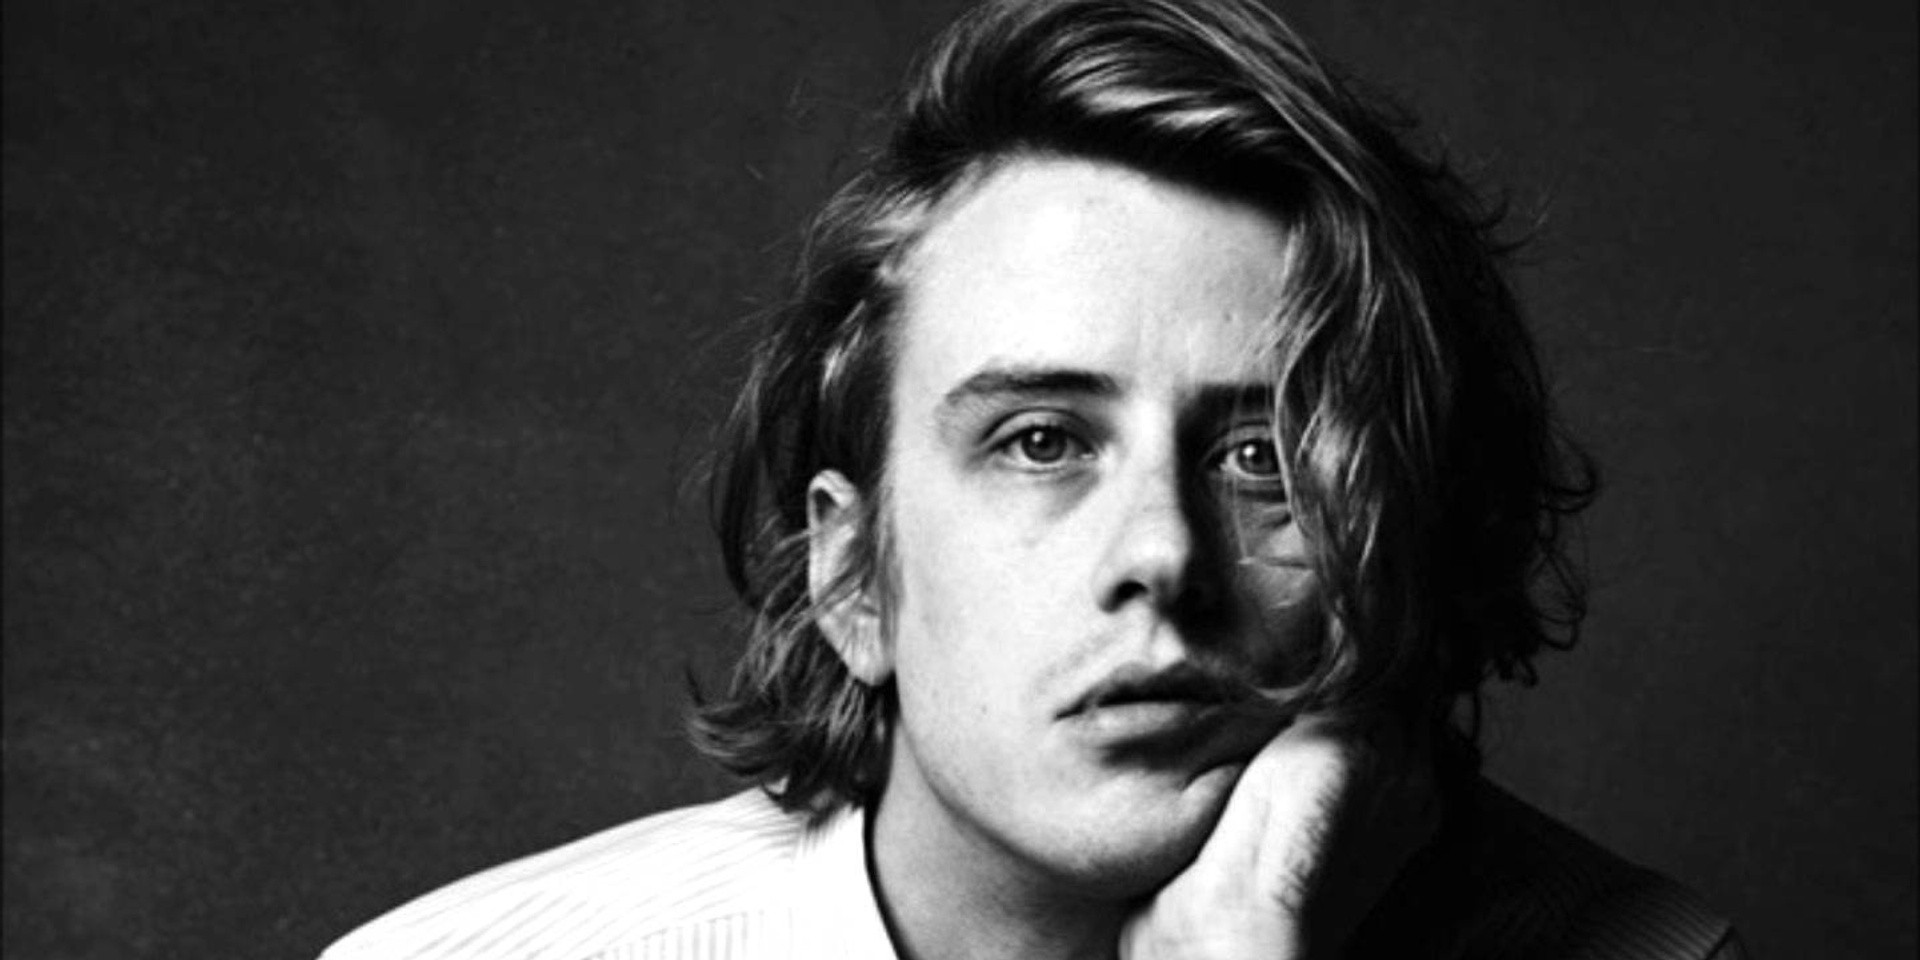 Christopher Owens will play an intimate acoustic show in Singapore